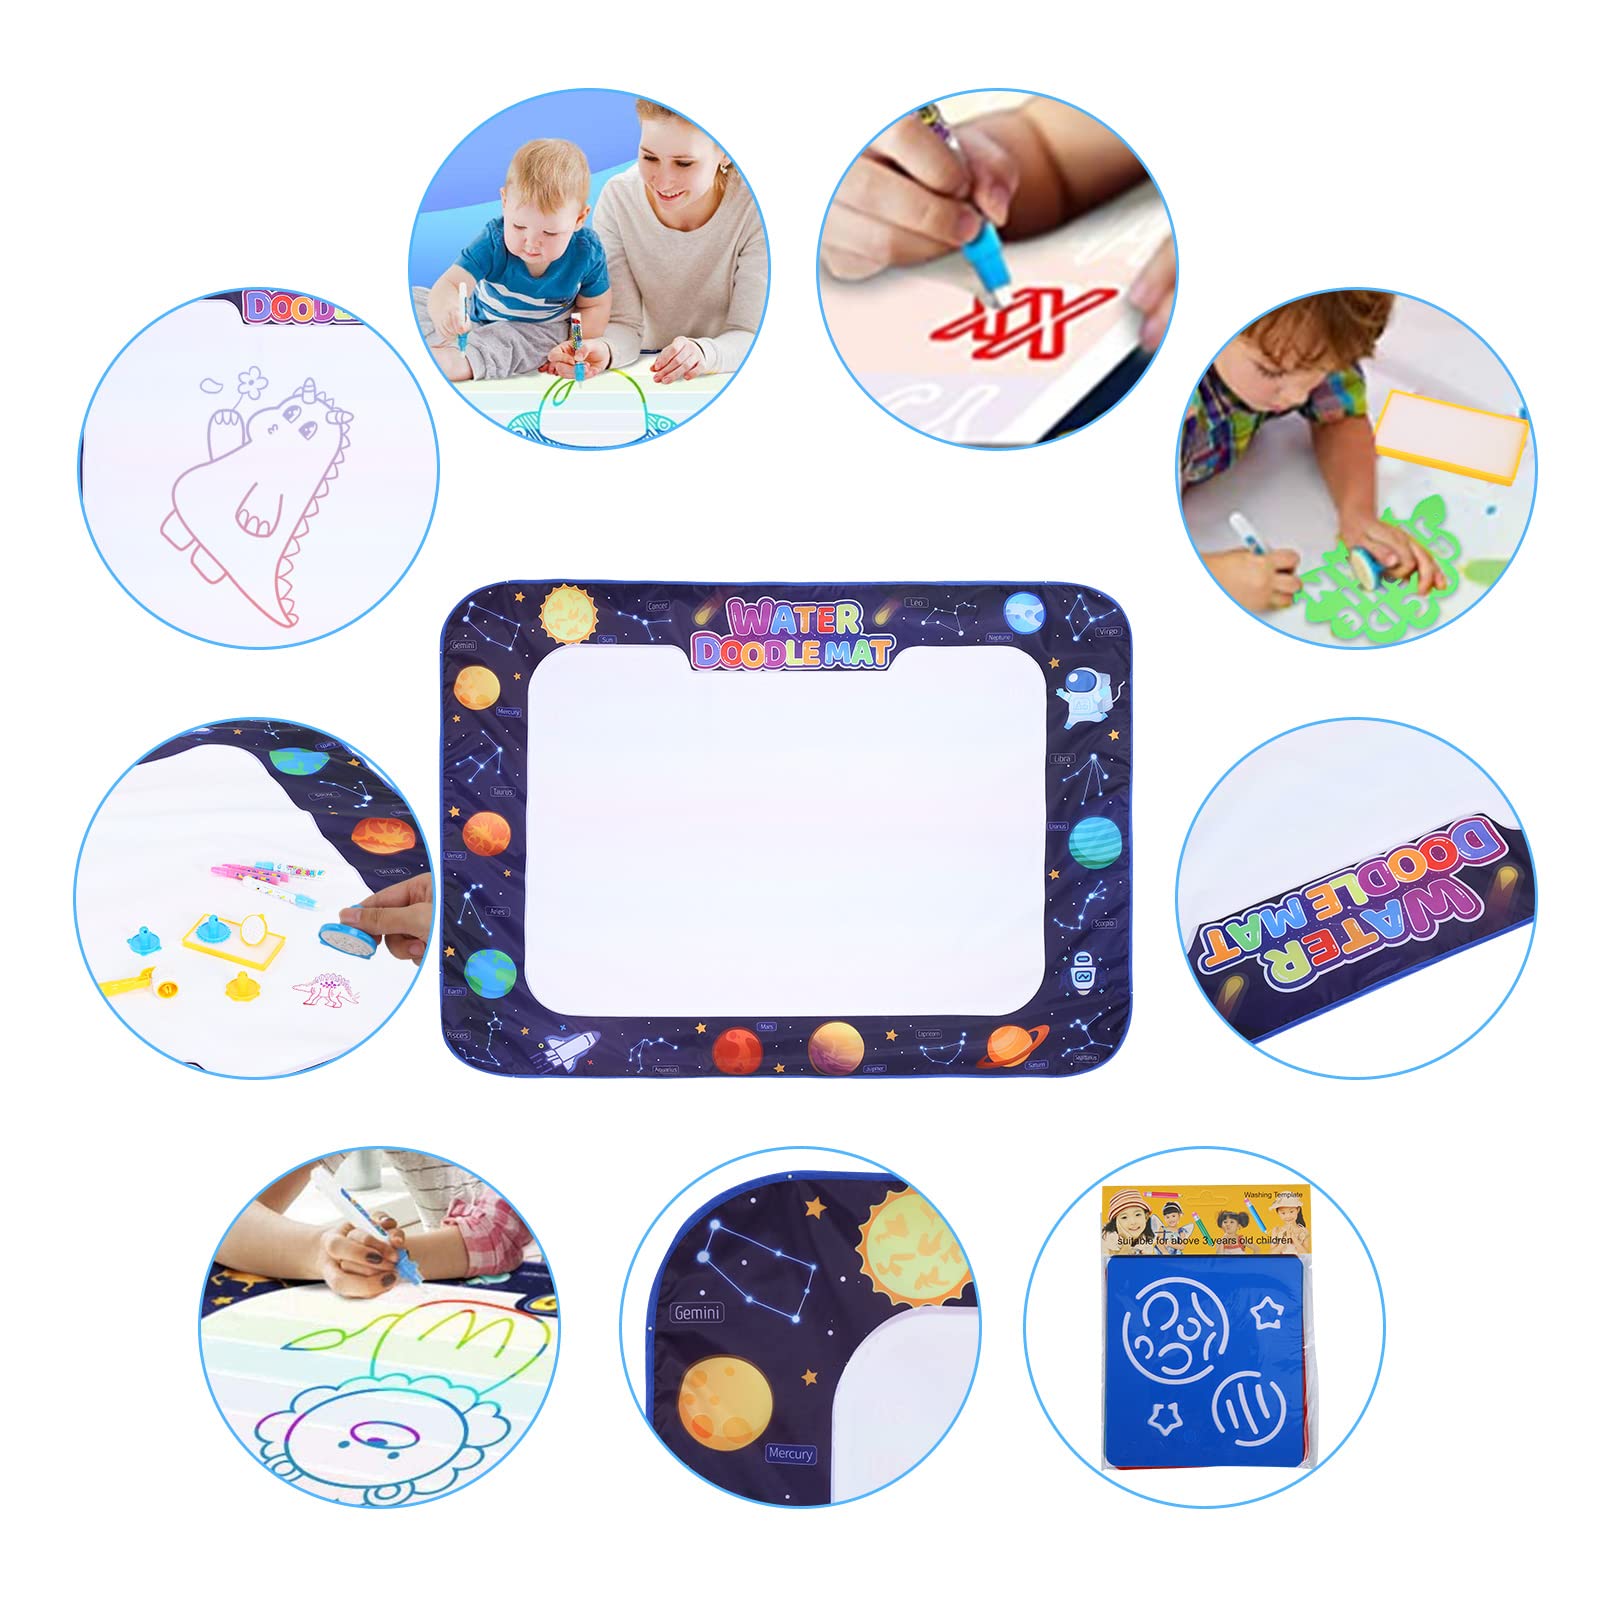 Water Doodle Mat - 60 x 45 Inches Extra Large Aqua Magic Doodle Drawing Mat, Educational Toys Gifts for Kids Toddlers Age 2 3 4 5 6 7 8 Year Old Boys Girls, Planets and Space Theme